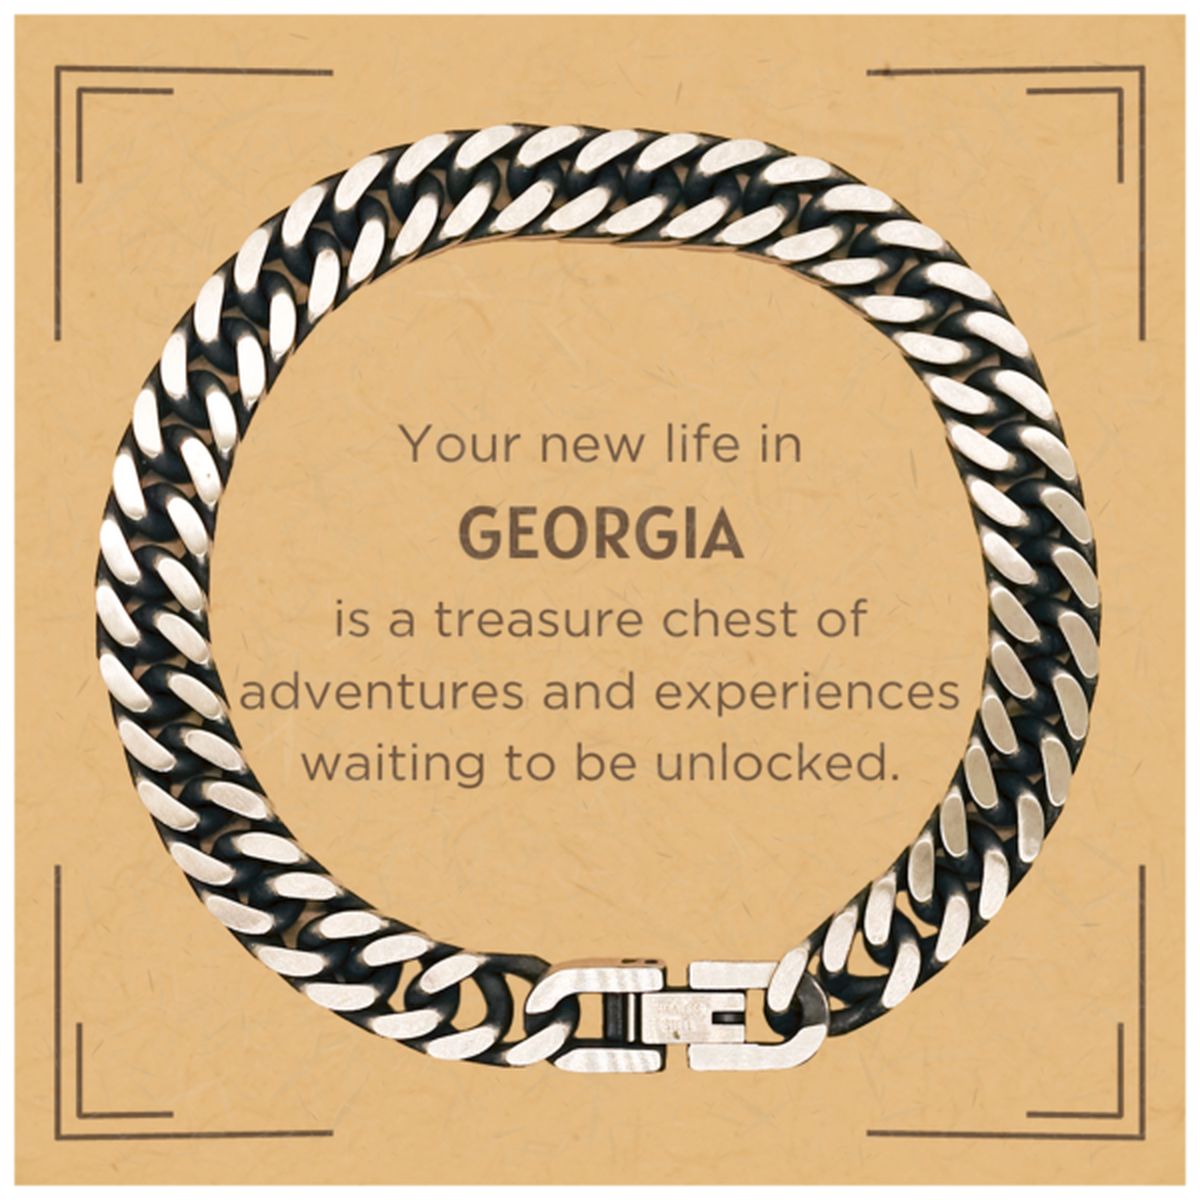 Moving to Georgia Gifts, Your new life in Georgia, Long Distance Georgia Christmas Cuban Link Chain Bracelet For Men, Women, Friends, Coworkers